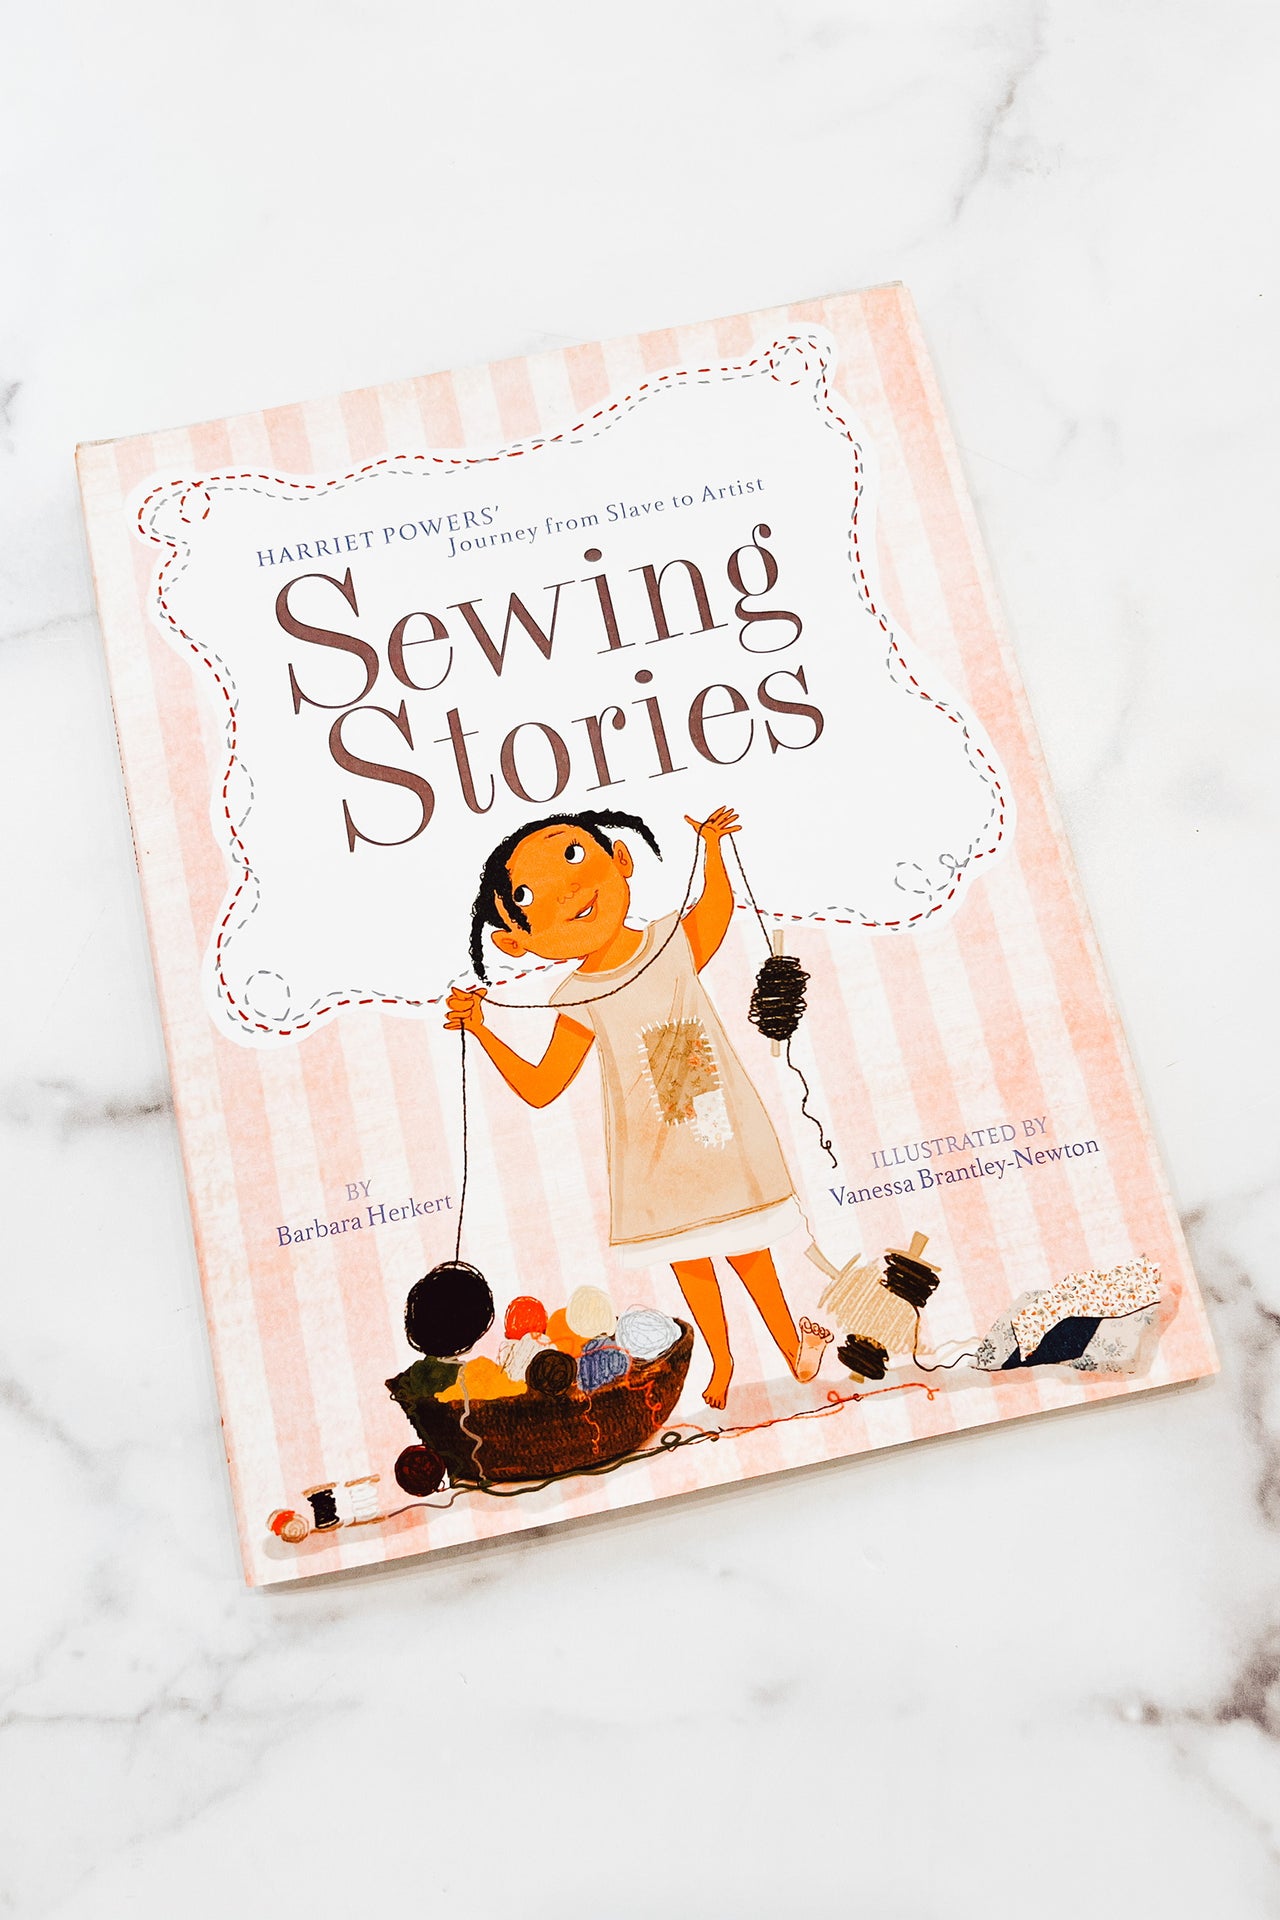 Sewing Stories Book: Harriet Powers' Journey from Slave to Artist